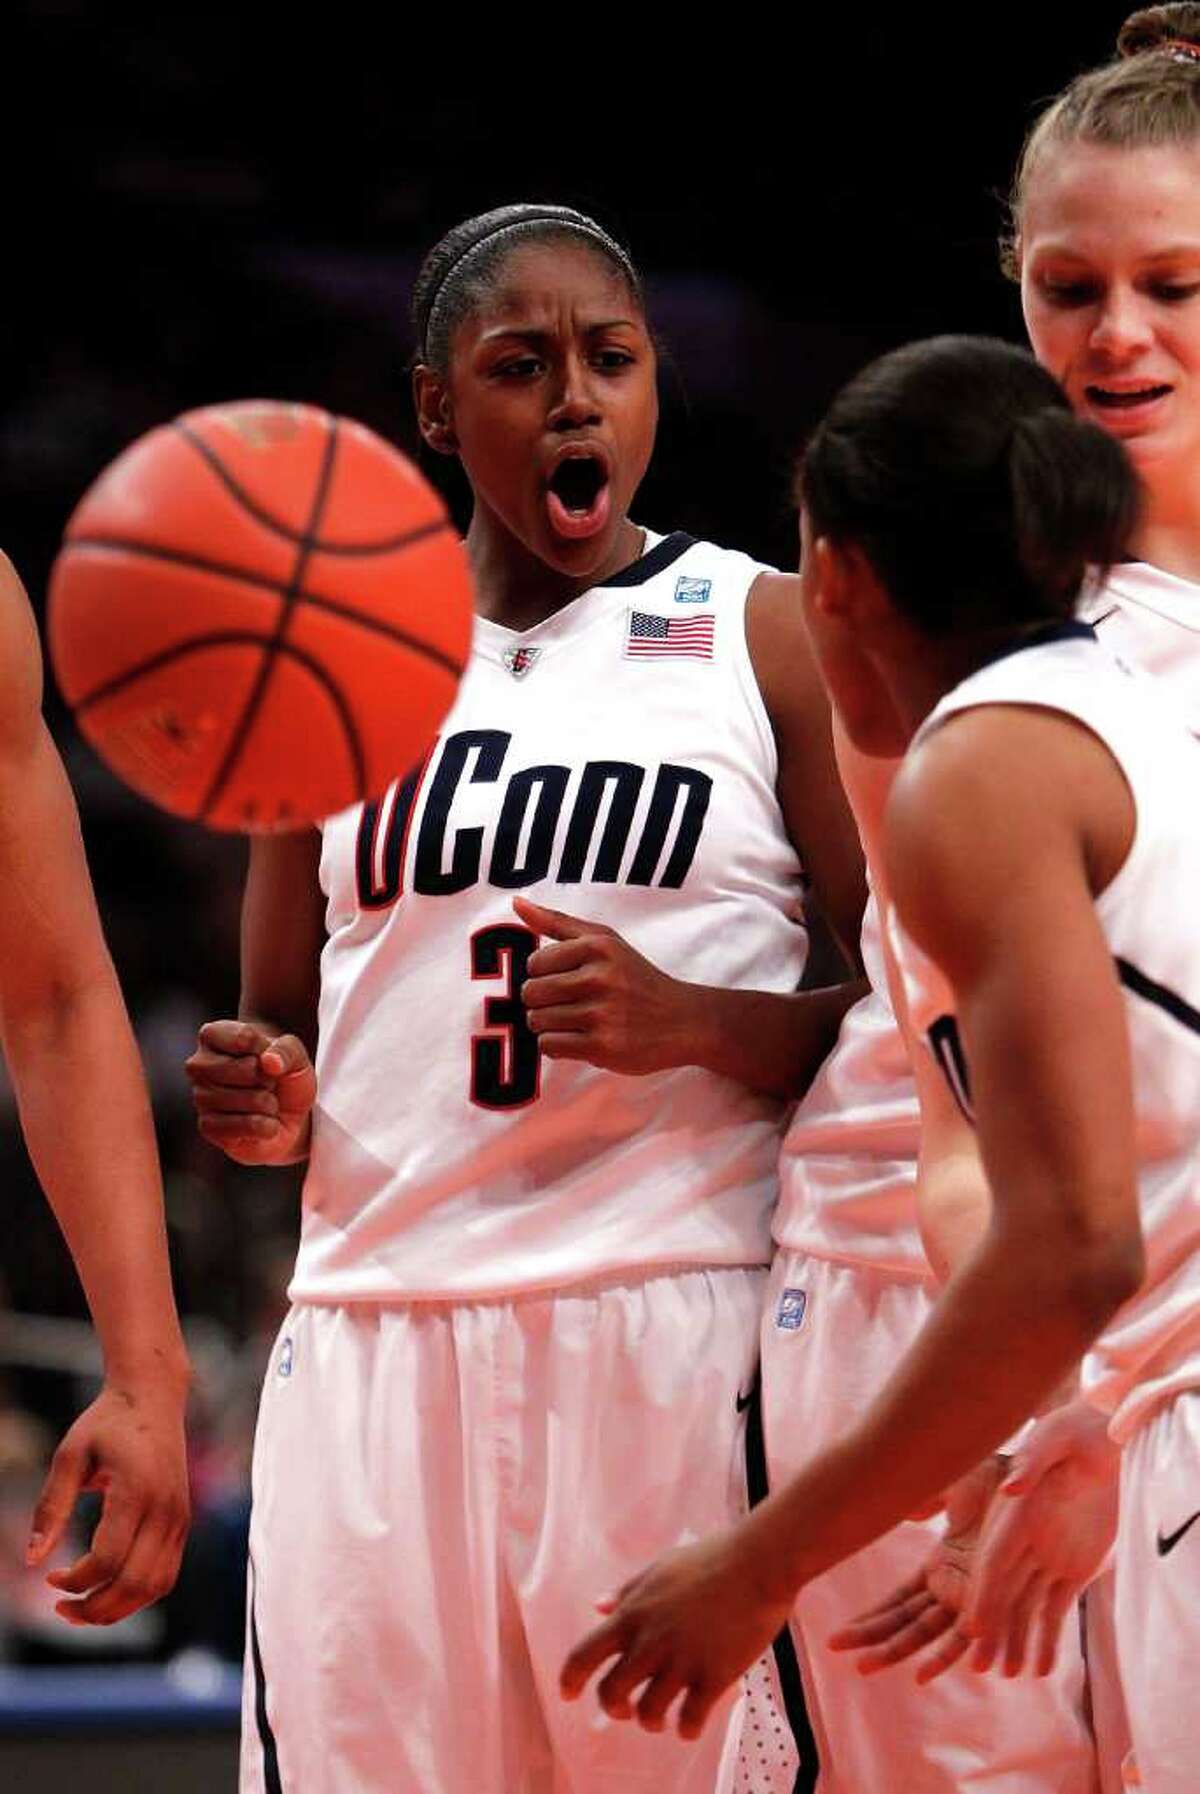 NEW YORK - DECEMBER 19: Tiffany Hayes #3 of the Connecticut Huskies reacts against the Ohio State Buckeyes in the Maggie Dixon Classic at Madison Square Garden on December 19, 2010 in New York City. (Photo by Jeff Zelevansky/Getty Images) *** Local Caption *** Tiffany Hayes